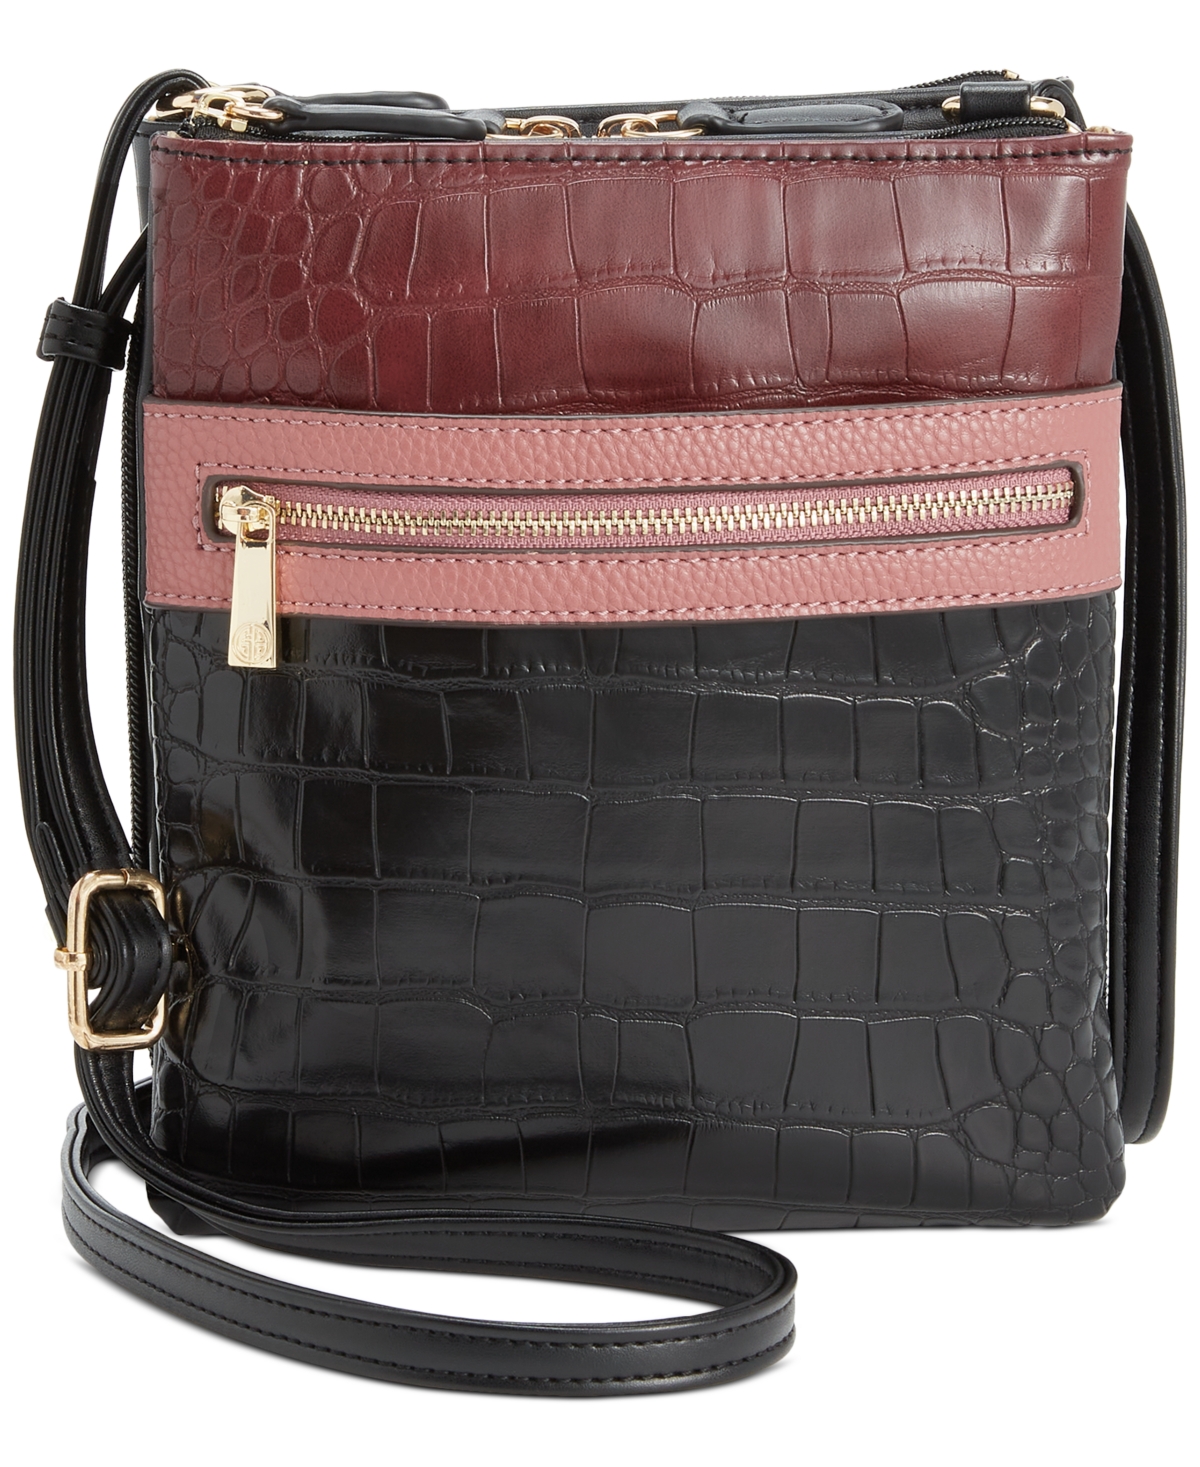 Croc Colorblock Dasher, Created for Macy's - Brown